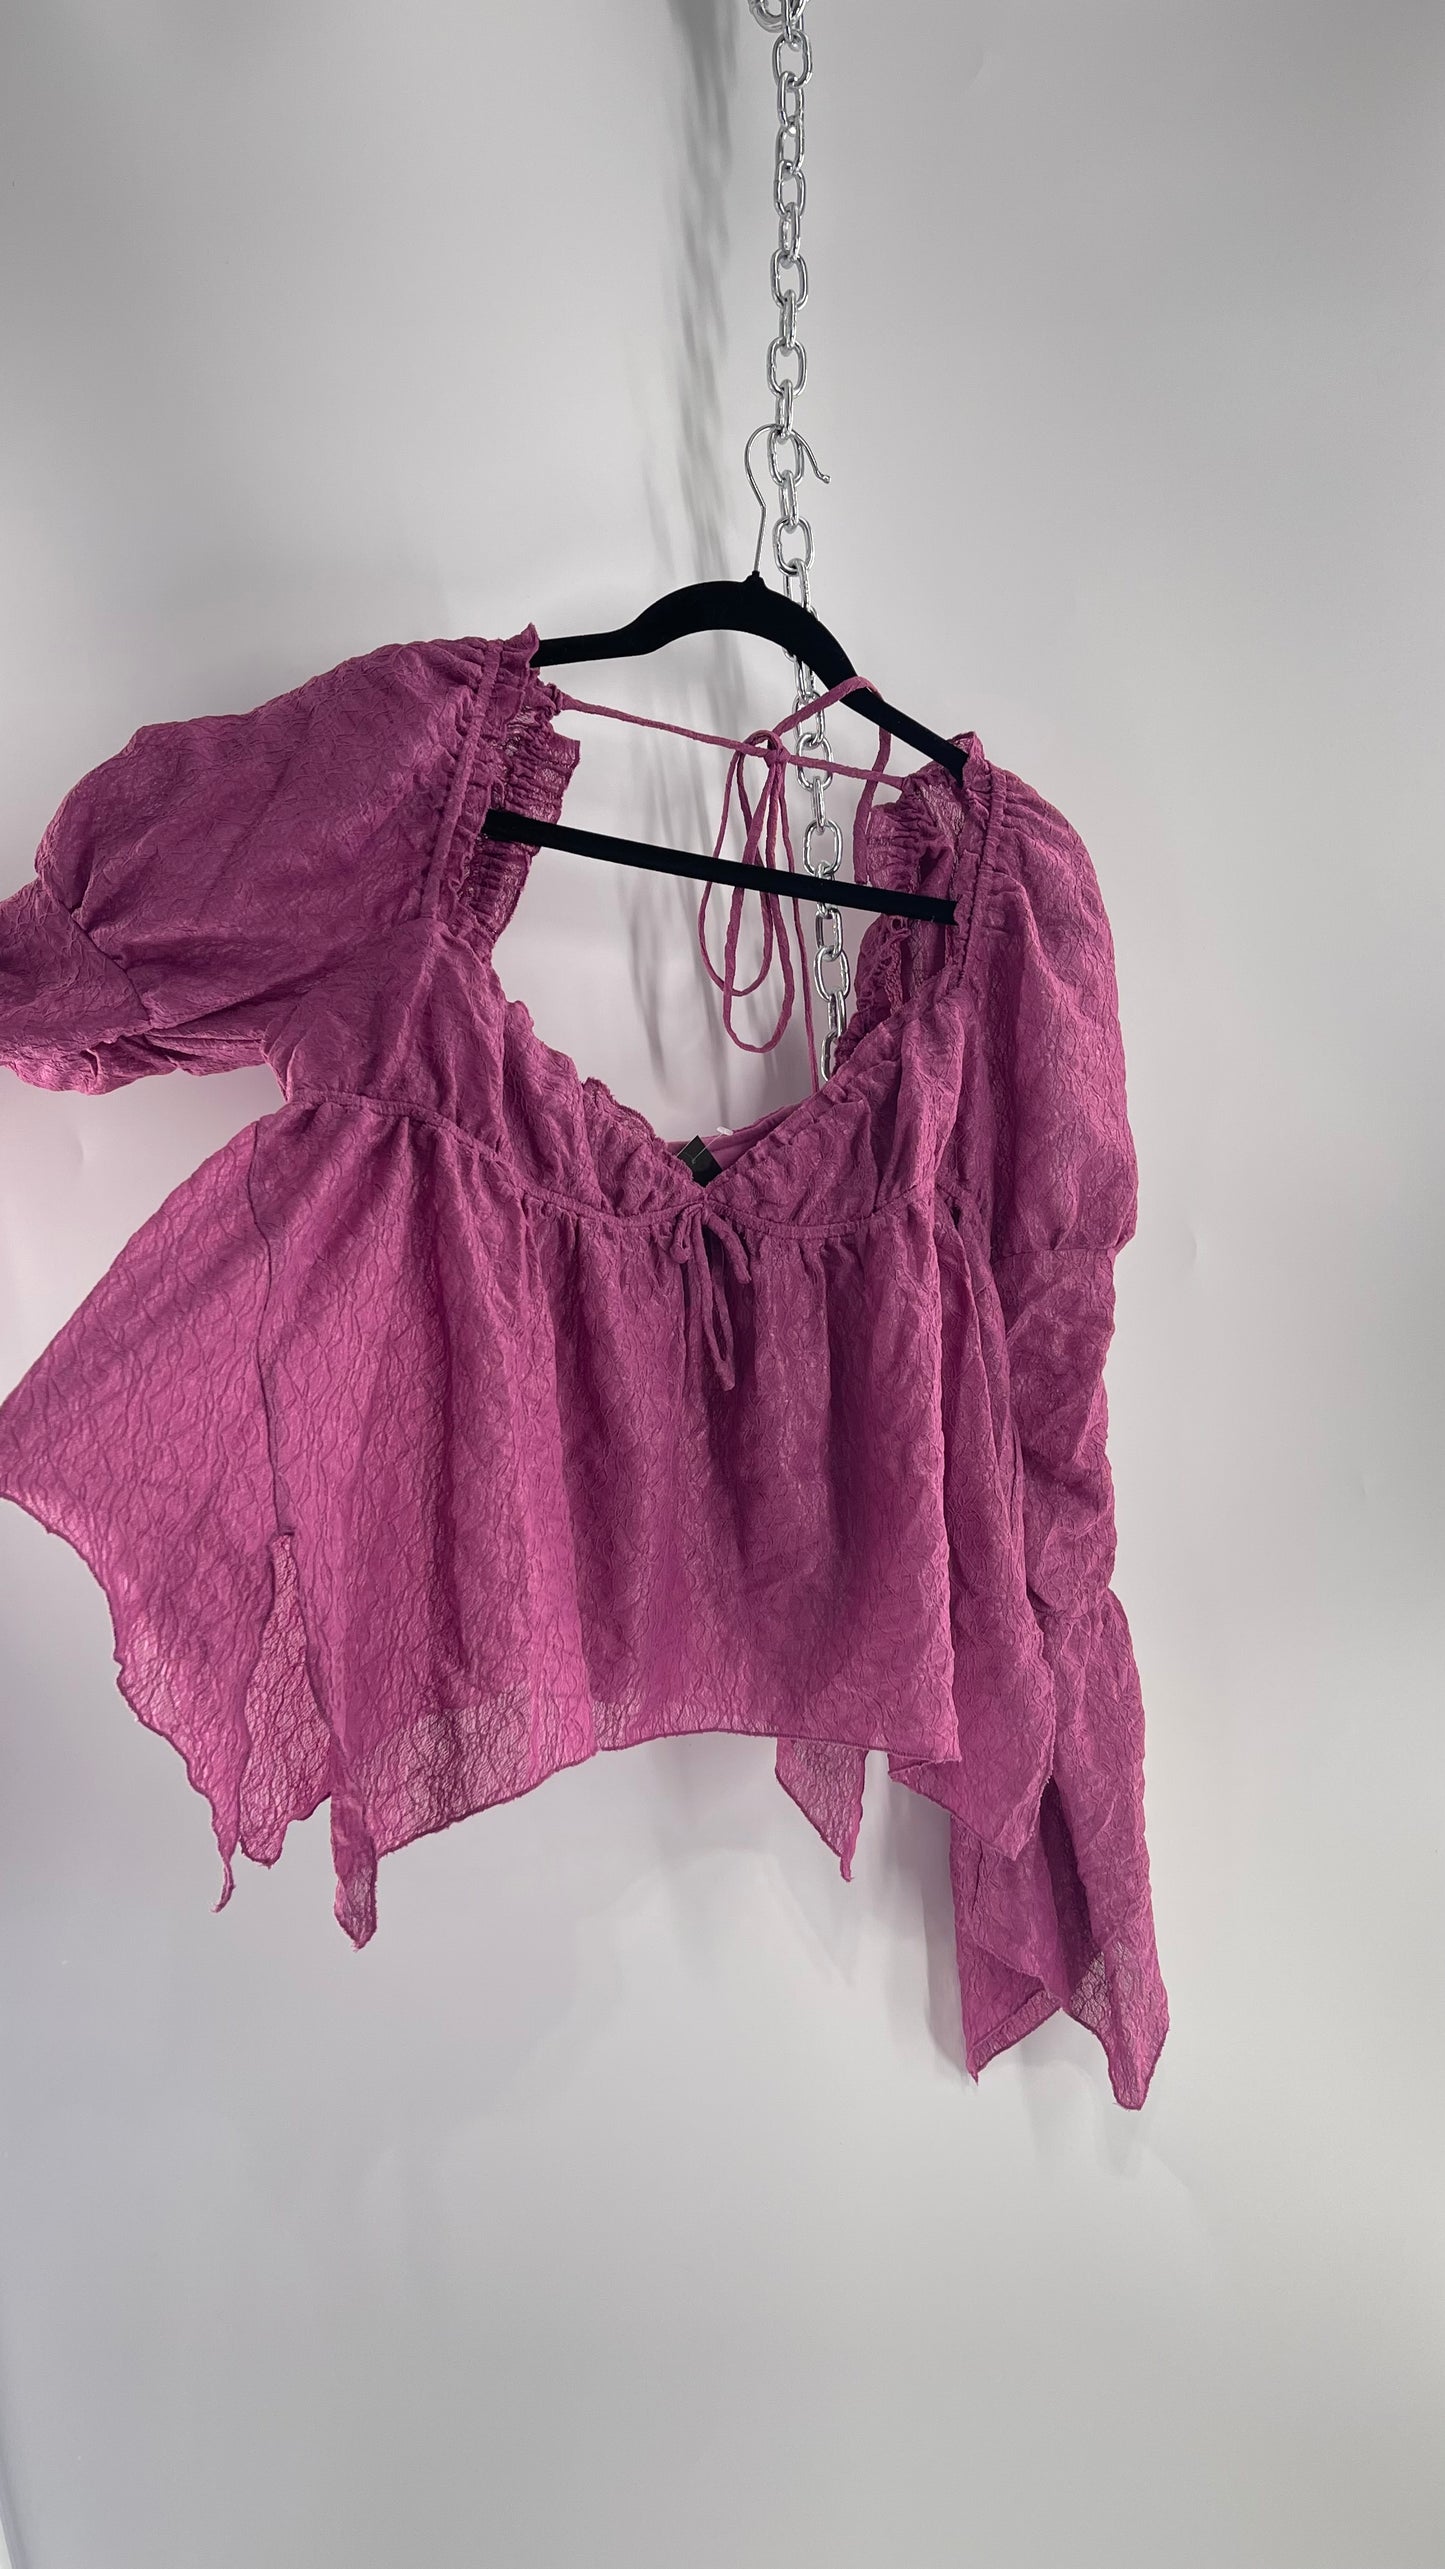 Urban Outfitters Purple Lace Blouse with Handkerchief Slit Hem, Princess Fairy Sleeves, Ruffle Trim Bust and Low Back (Large)